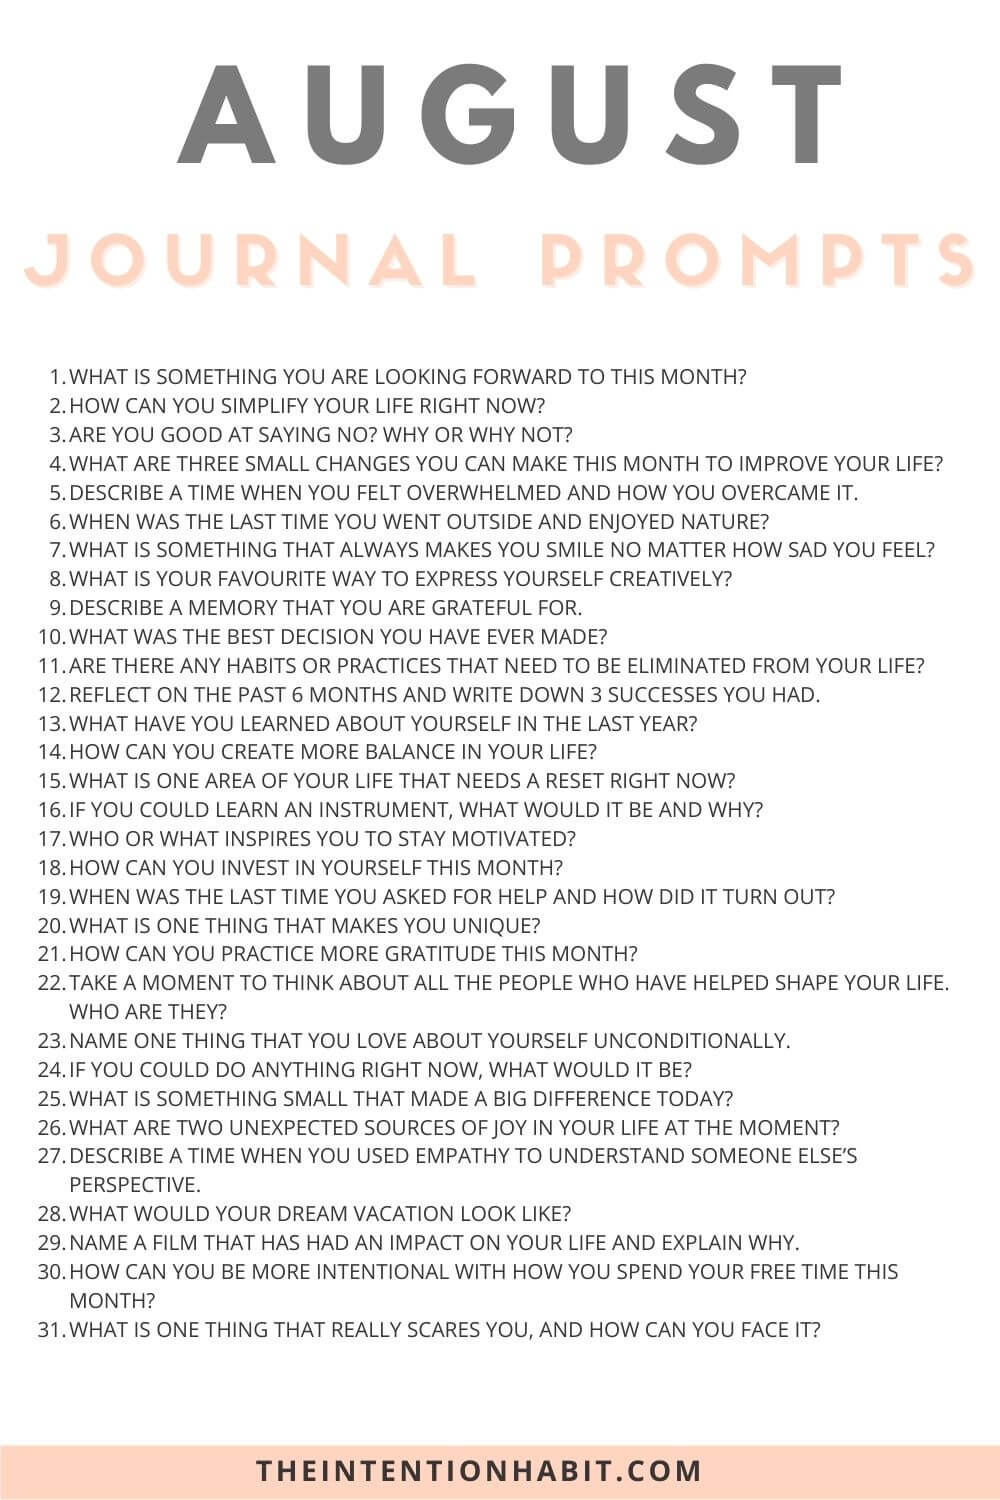 list of august journal prompts